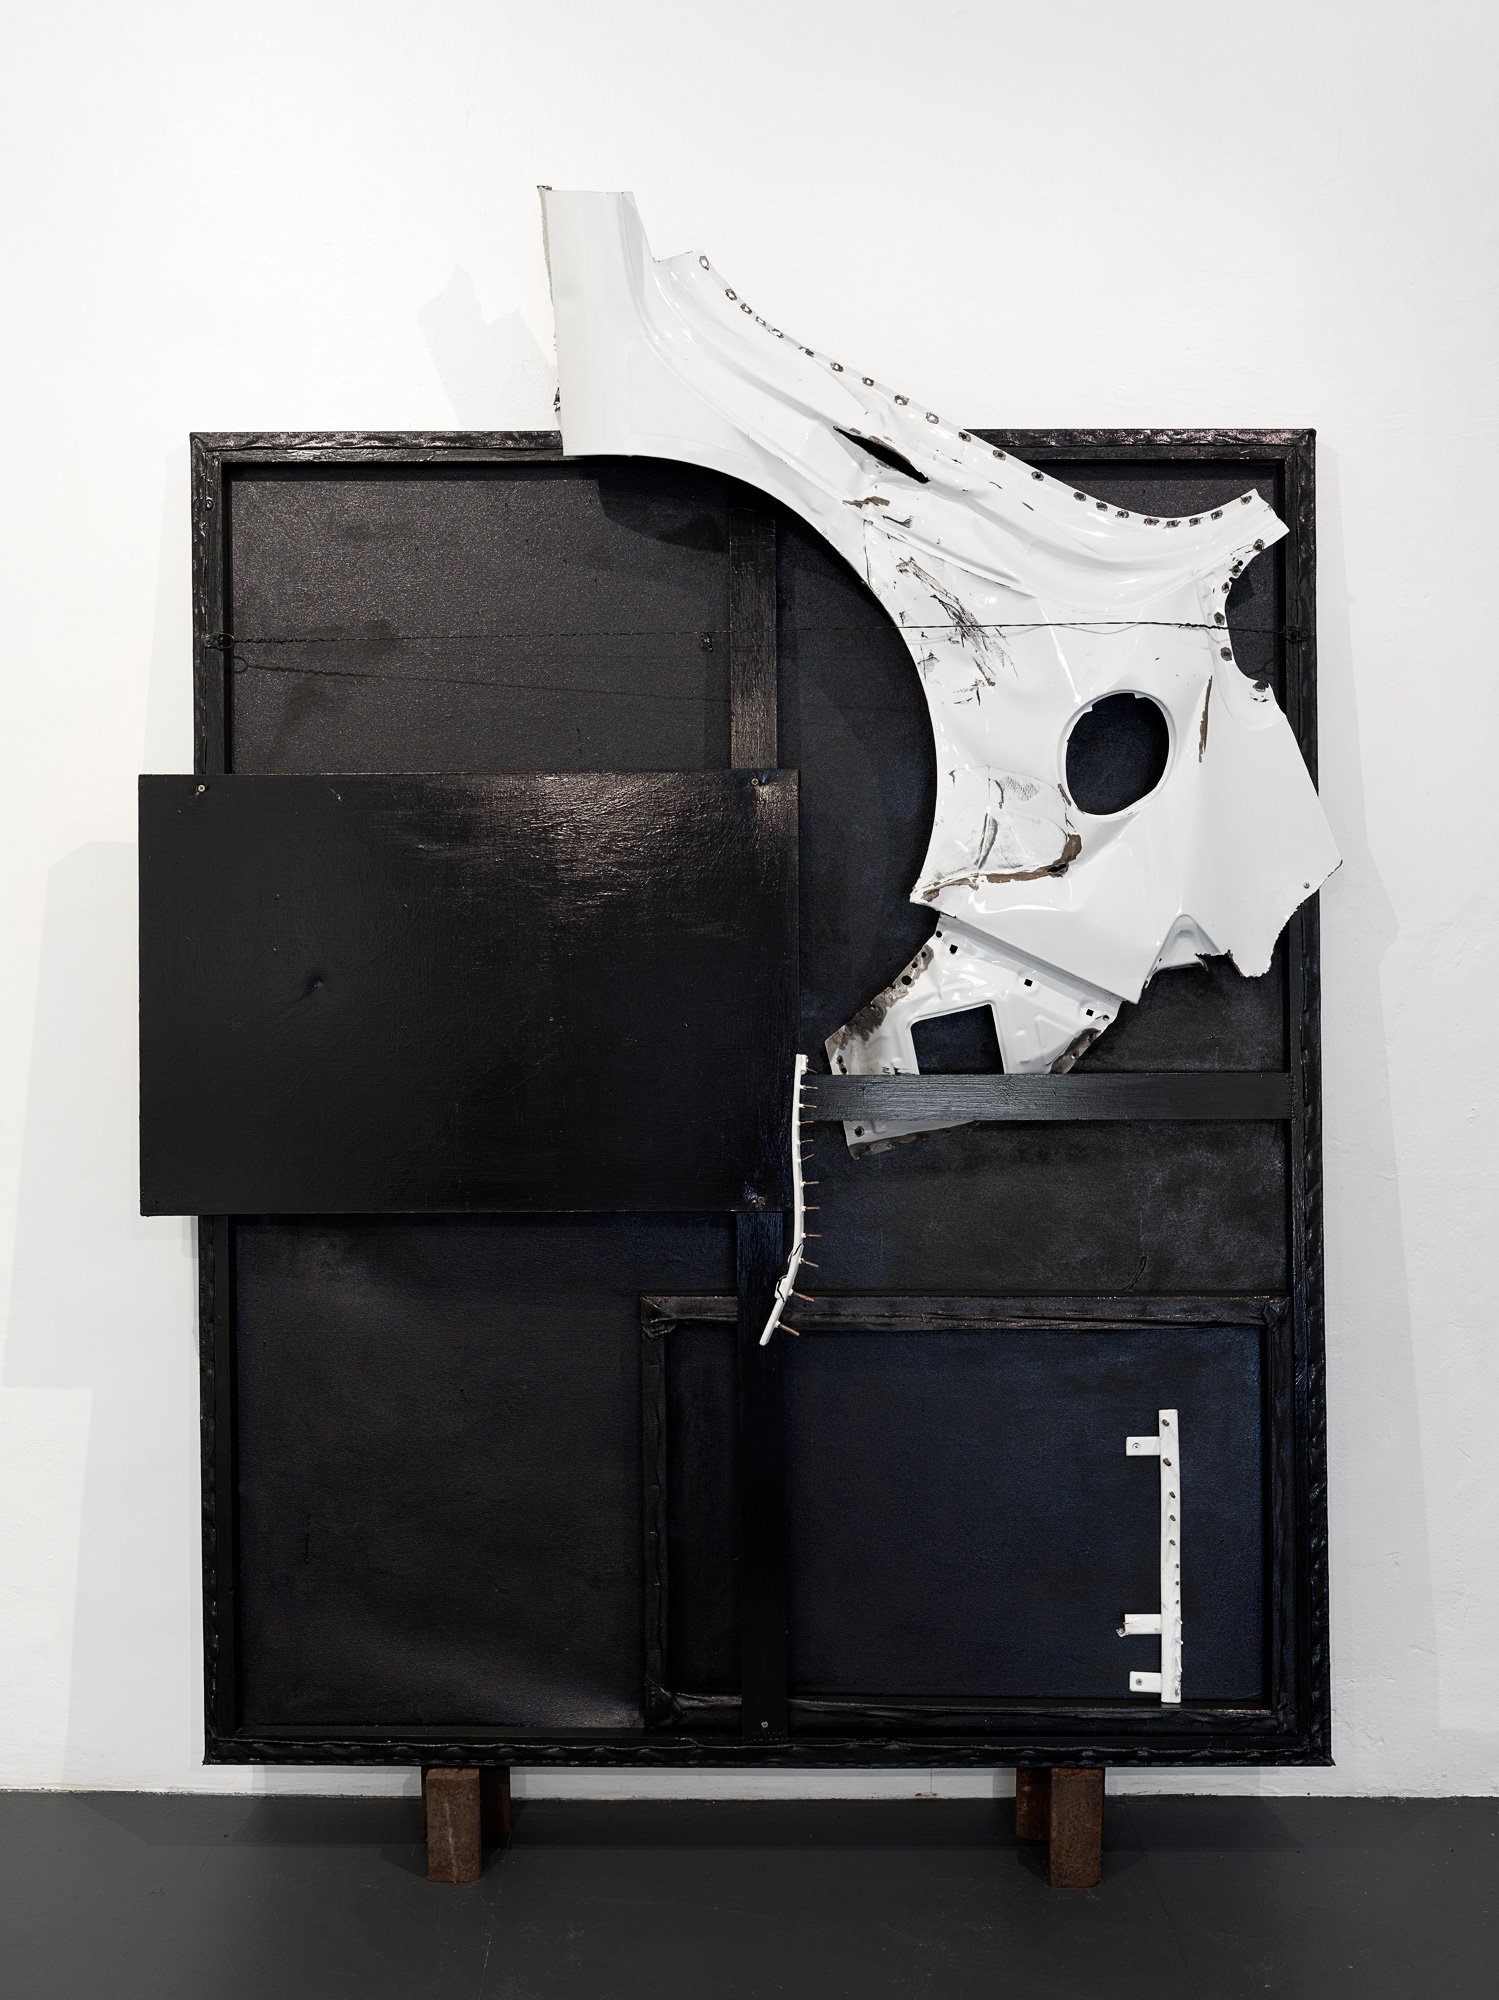   Informe  III,  2020  found wrecked car body part, found plastic covered metal, used stretched canvas, house paint, screws, wire, D-rings  approx 210 x 165 x 26 cm   Photograph Grant Hancock 